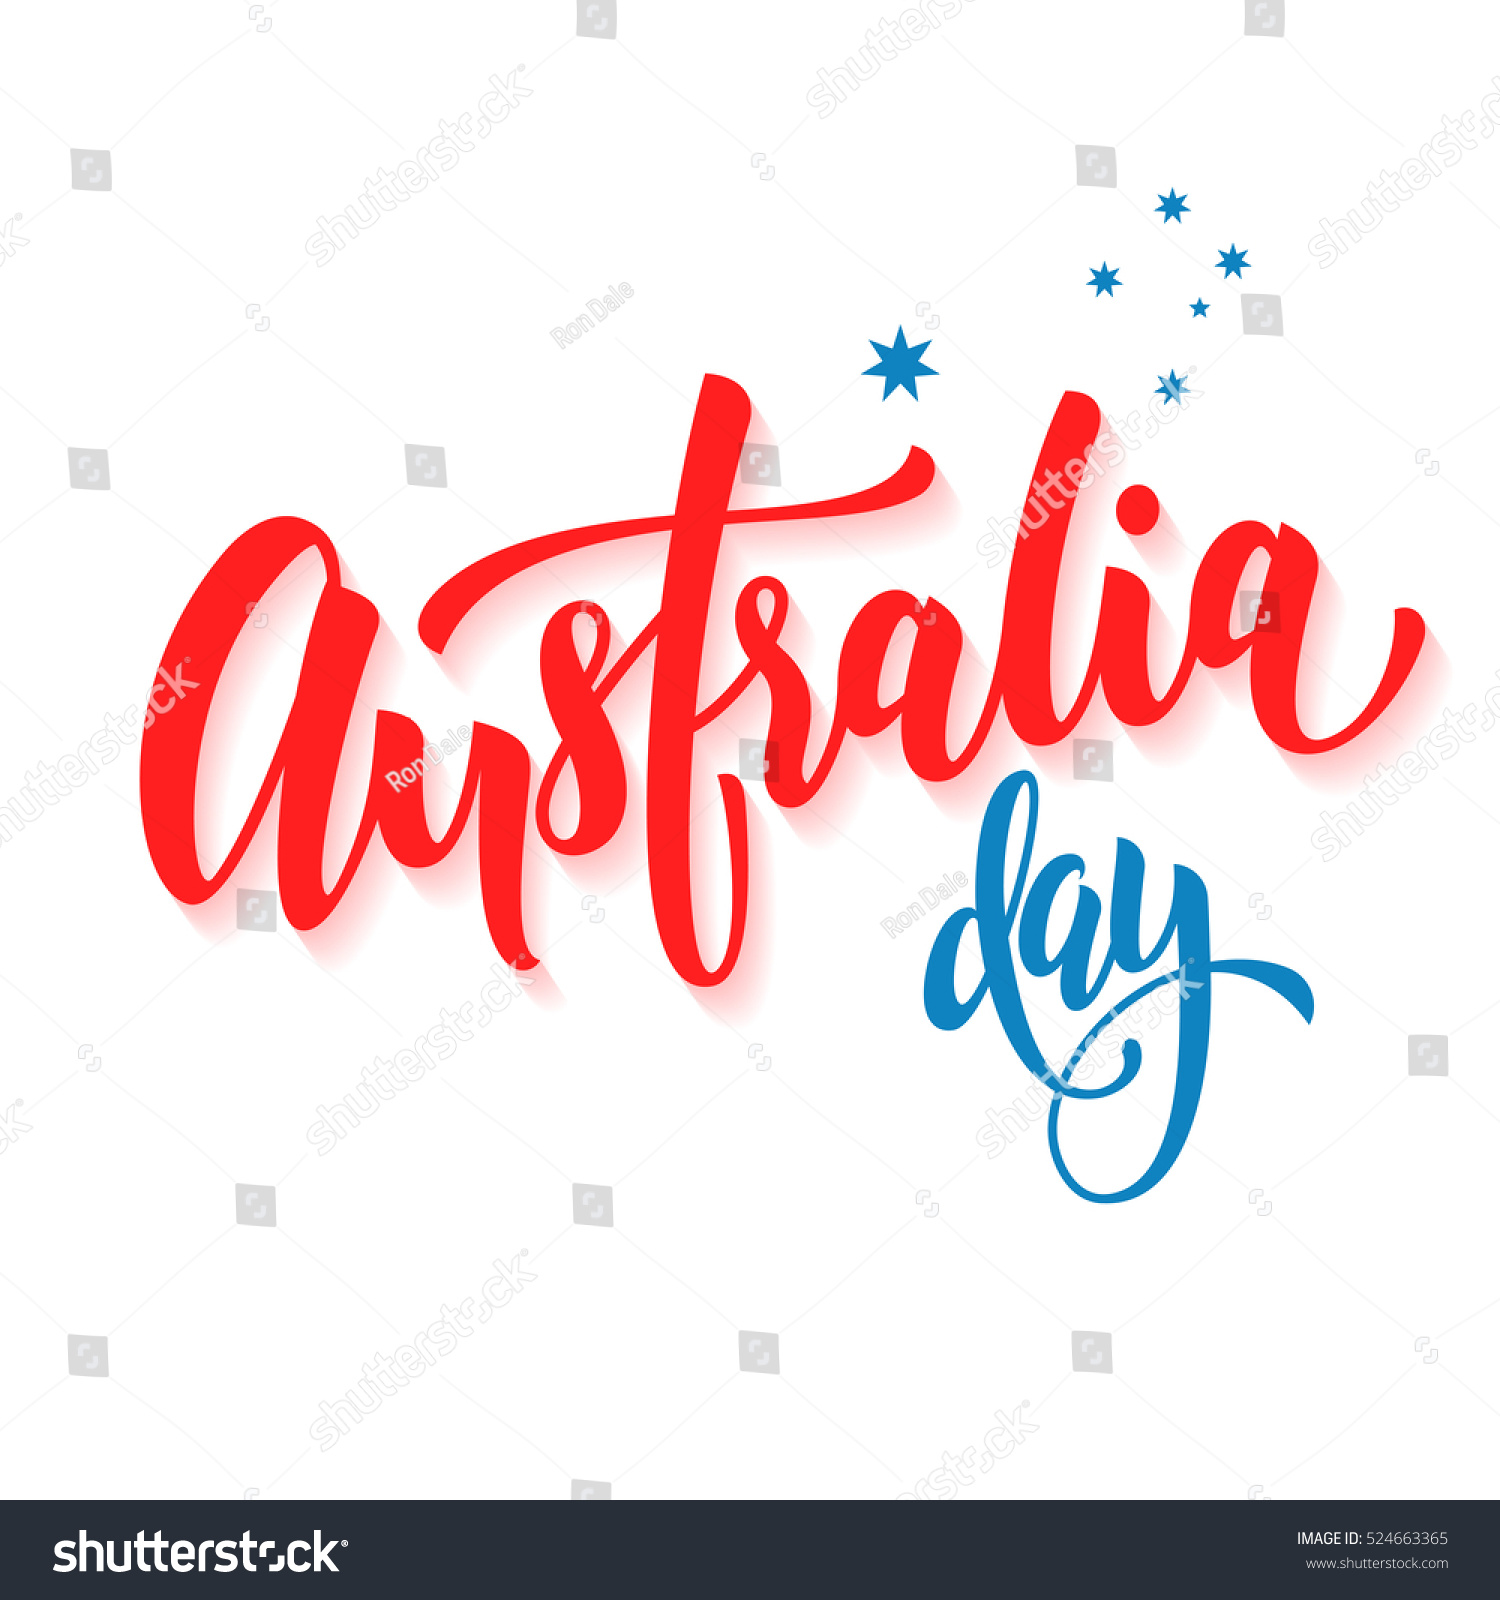 SVG of Happy Australia Day poster. Australian flag vector illustration greeting card with hand drawn calligraphy lettering. Australia text on white background with stars svg